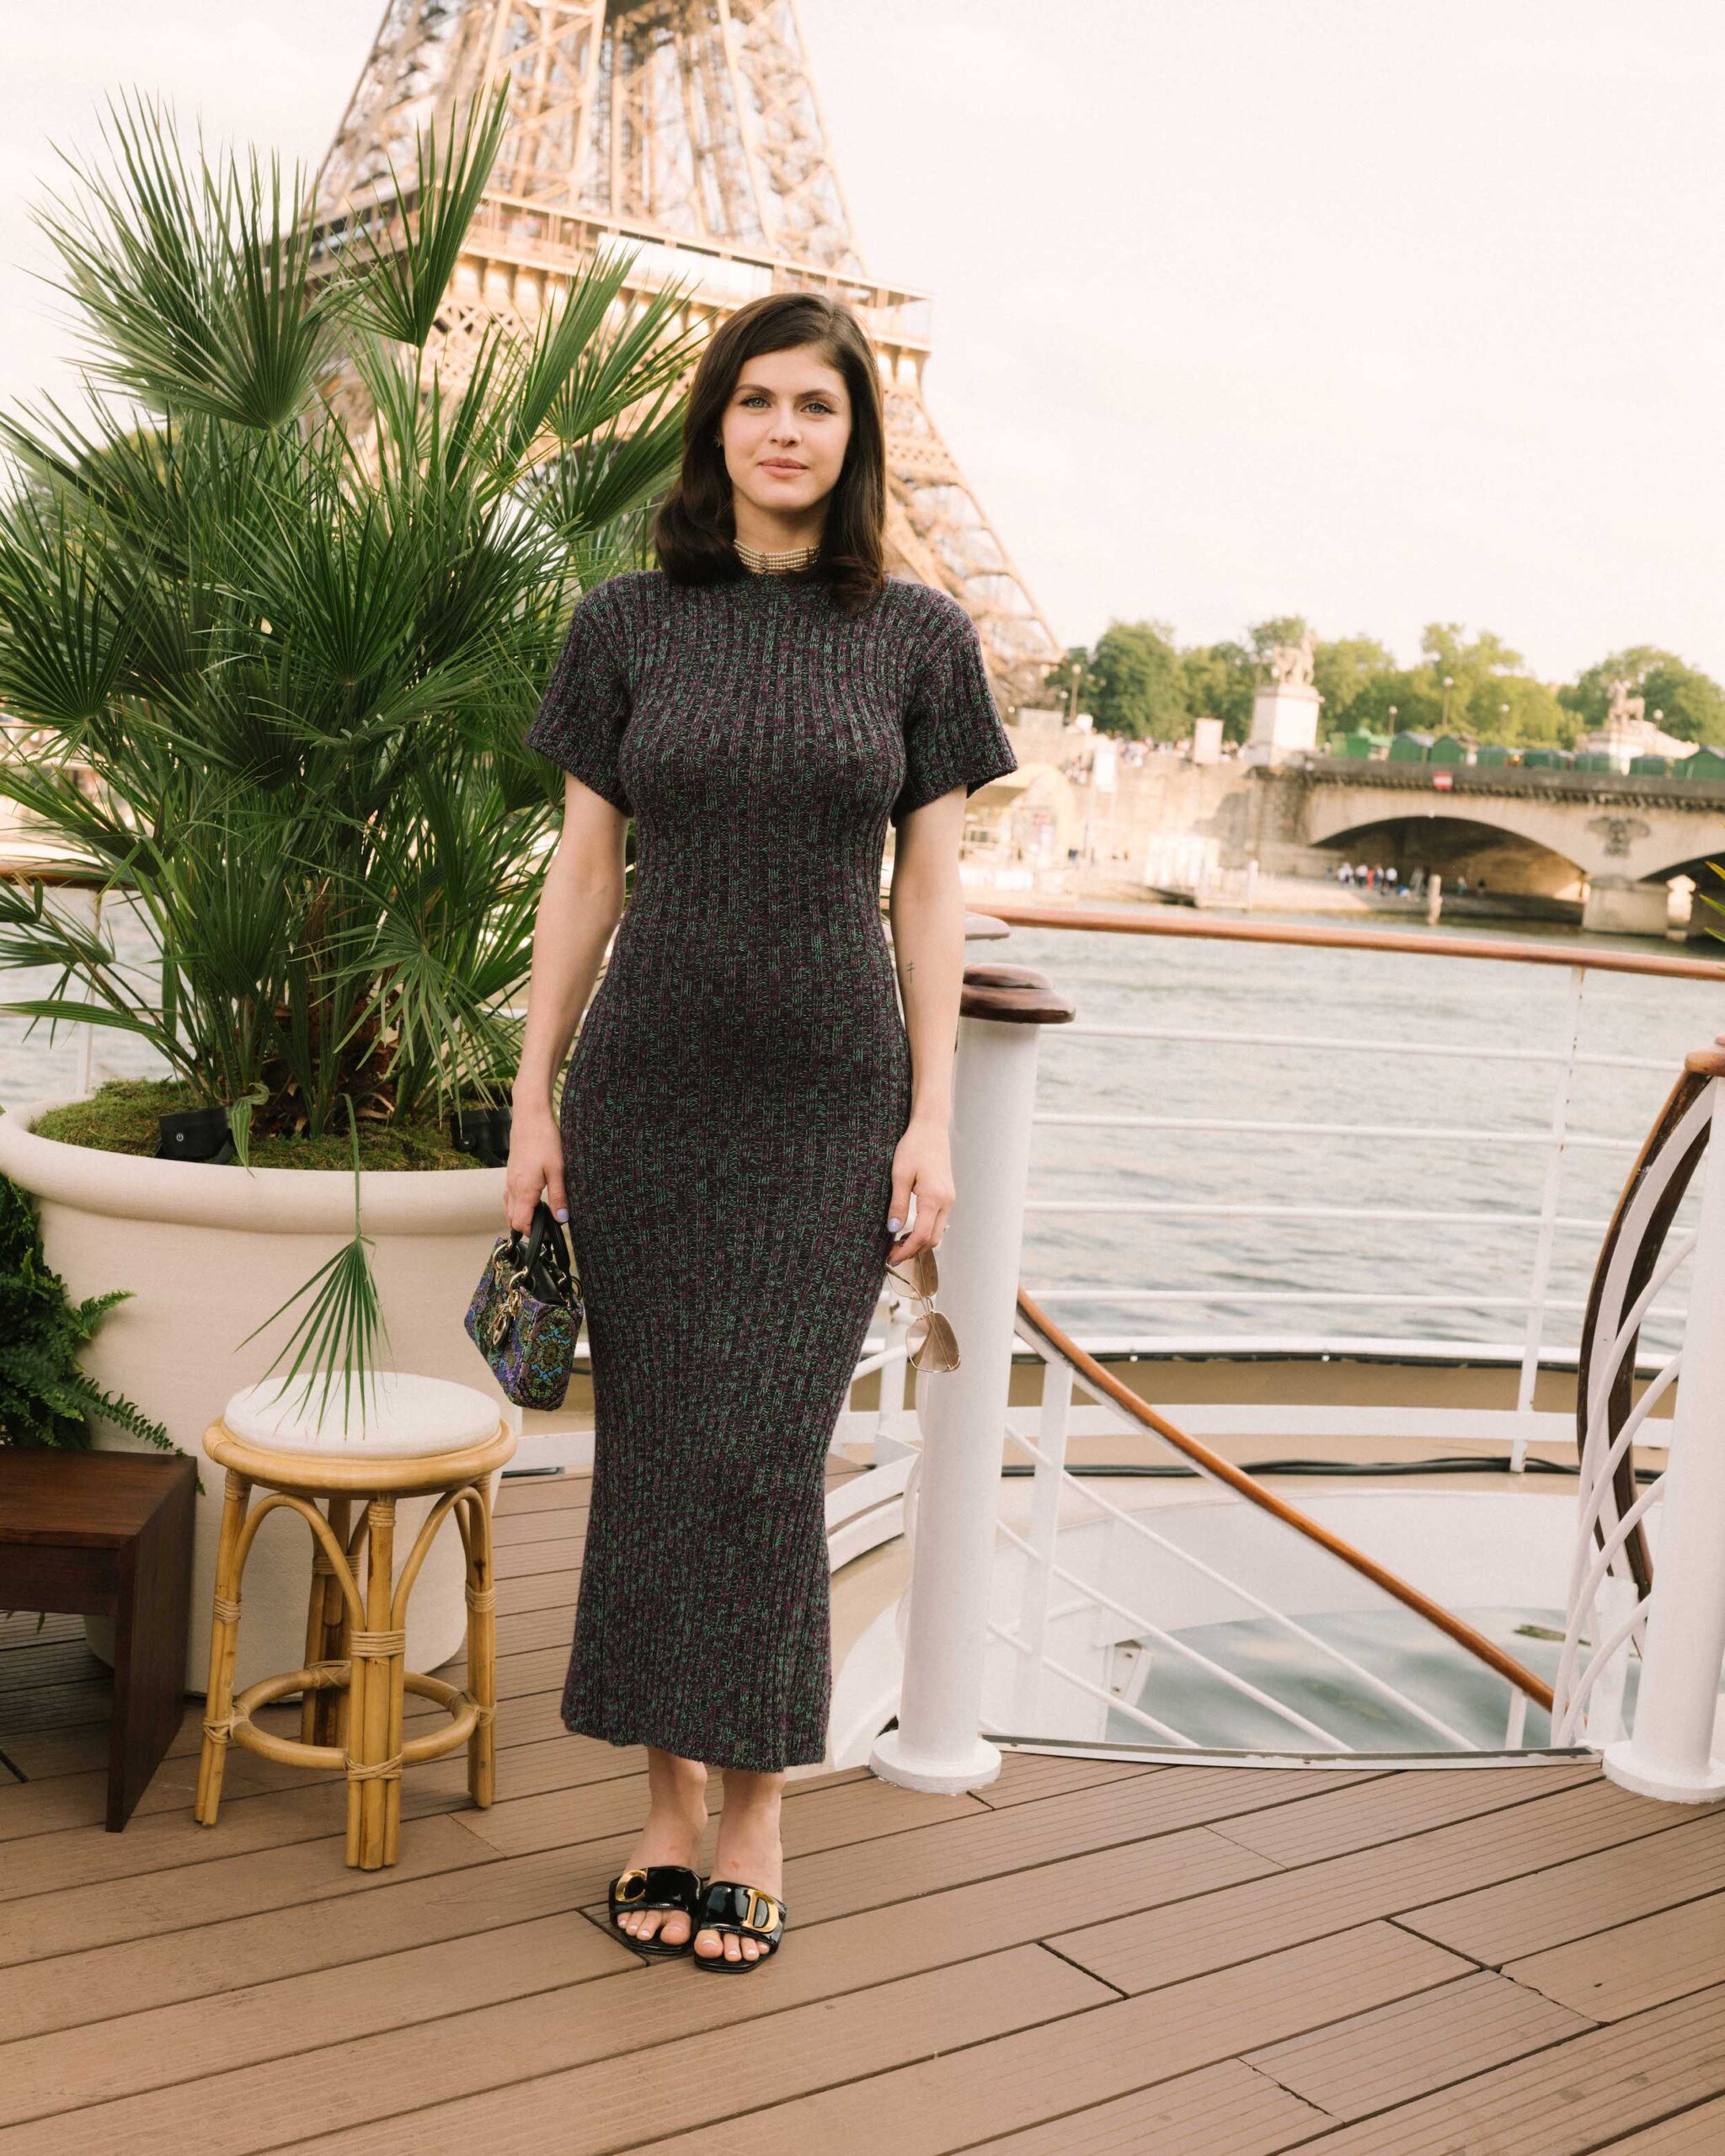 Alexandra Daddario in Dior Pre Fall 2023 Alexandra Daddario showcased impeccable style in a purple knit dress from the Dior Pre Fall 2023 collection. She completed her look with a Dior bag, necklace, and shoes.